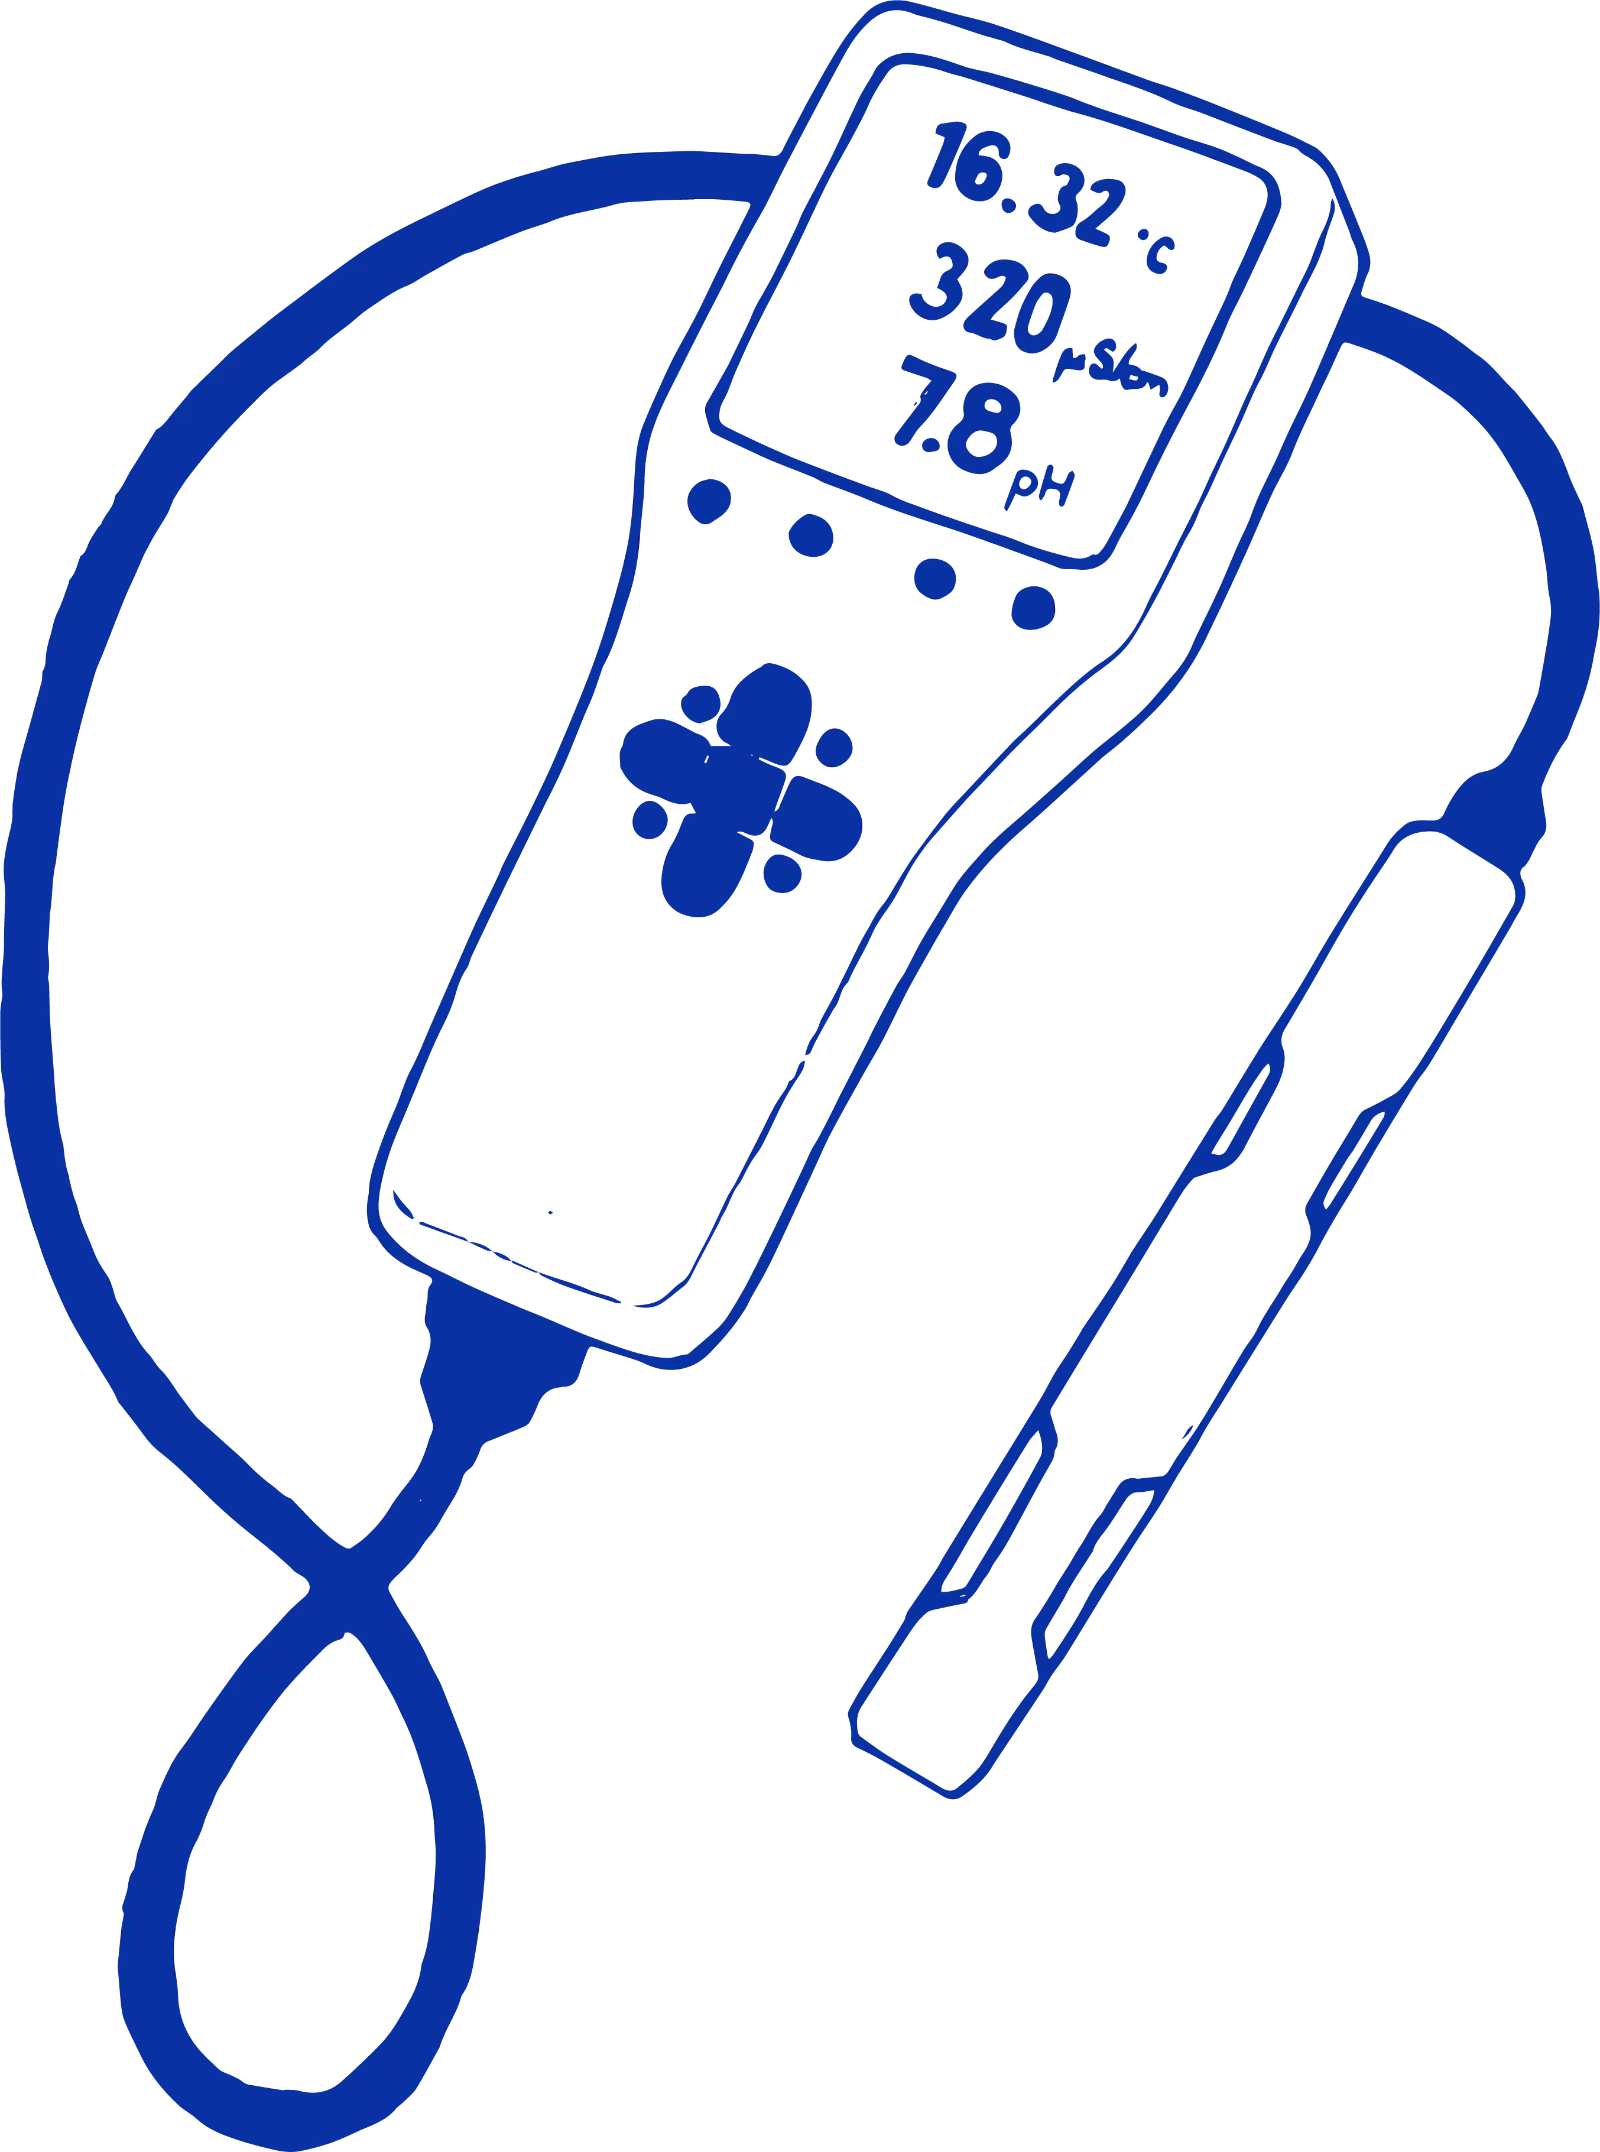 A blue sketch of a handheld device with sonde.